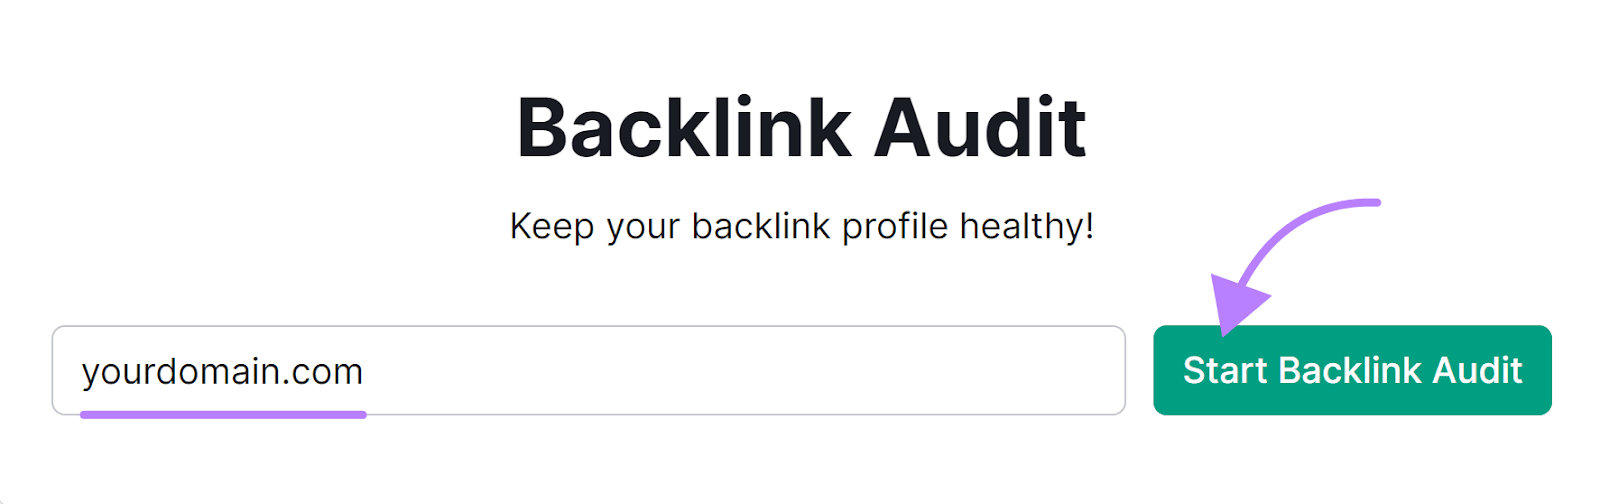 Backlink Audit search for "yourdomain.com"